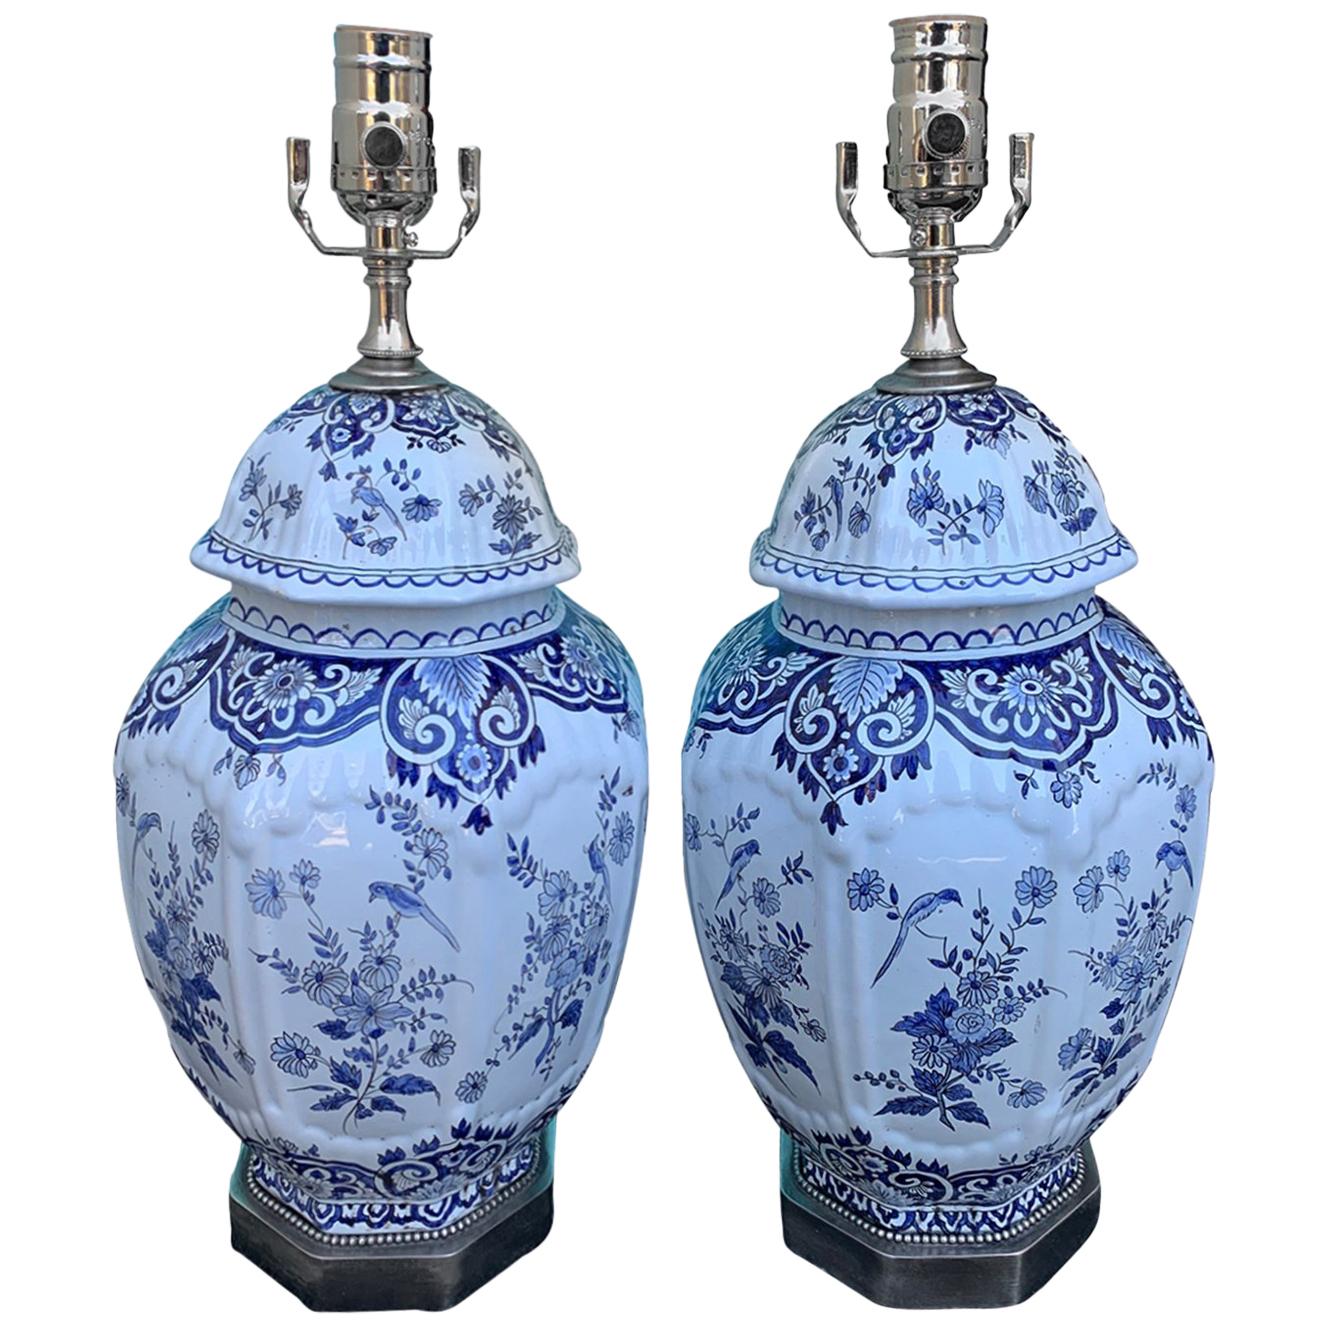 Pair of 19th Century Dutch Delft Blue and White Lamps